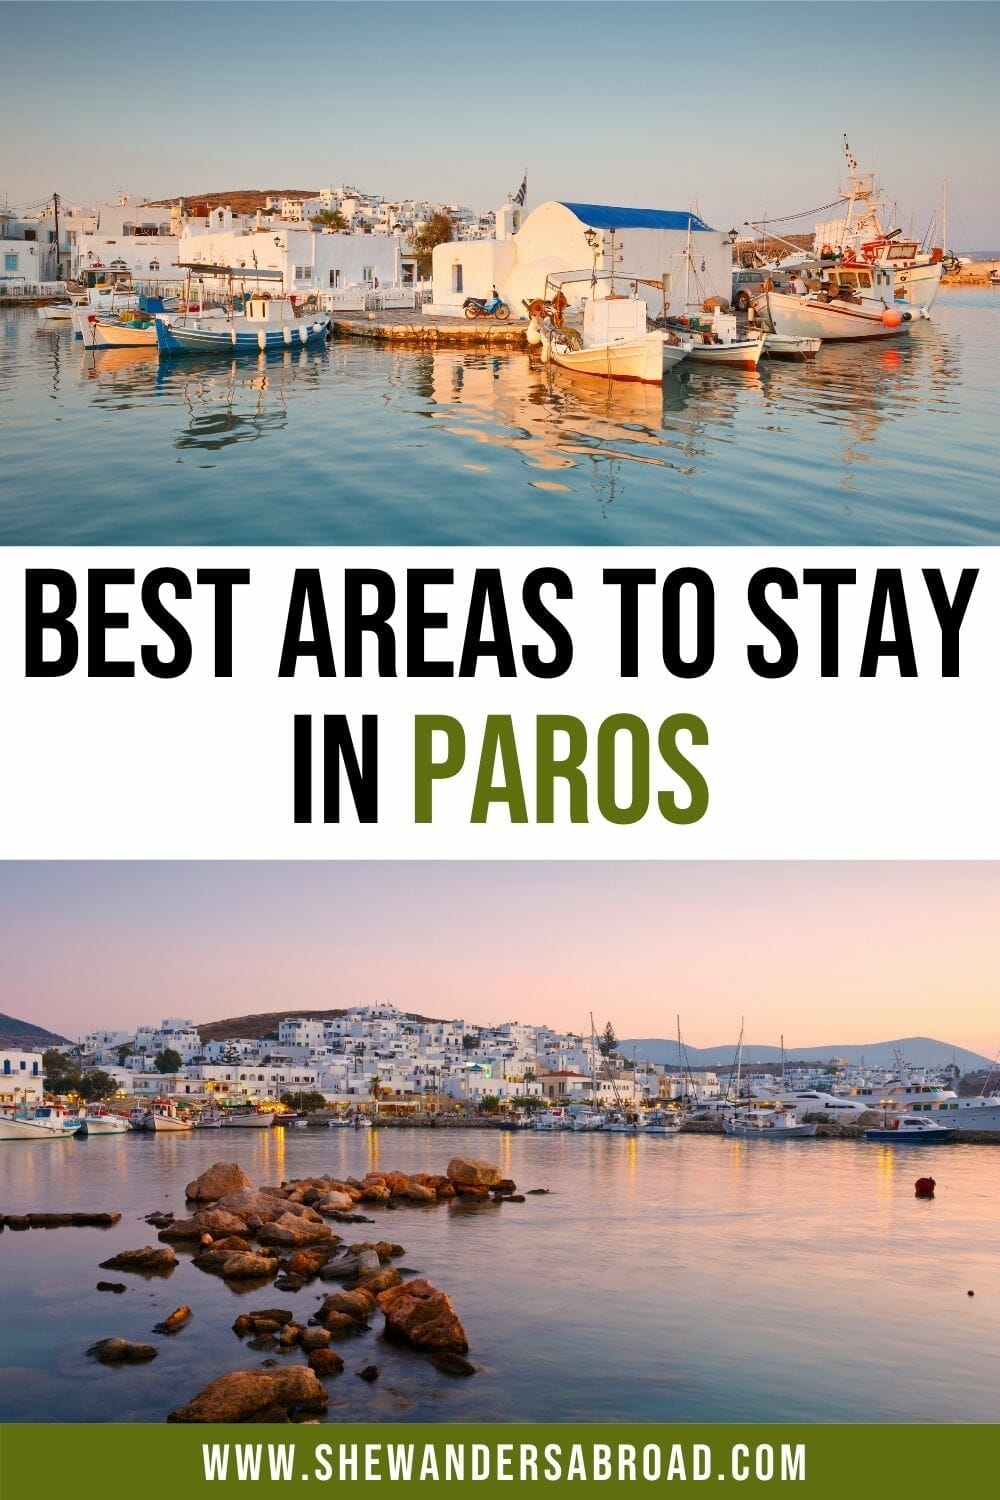 Where to Stay in Paros: 6 Best Areas & Hotels